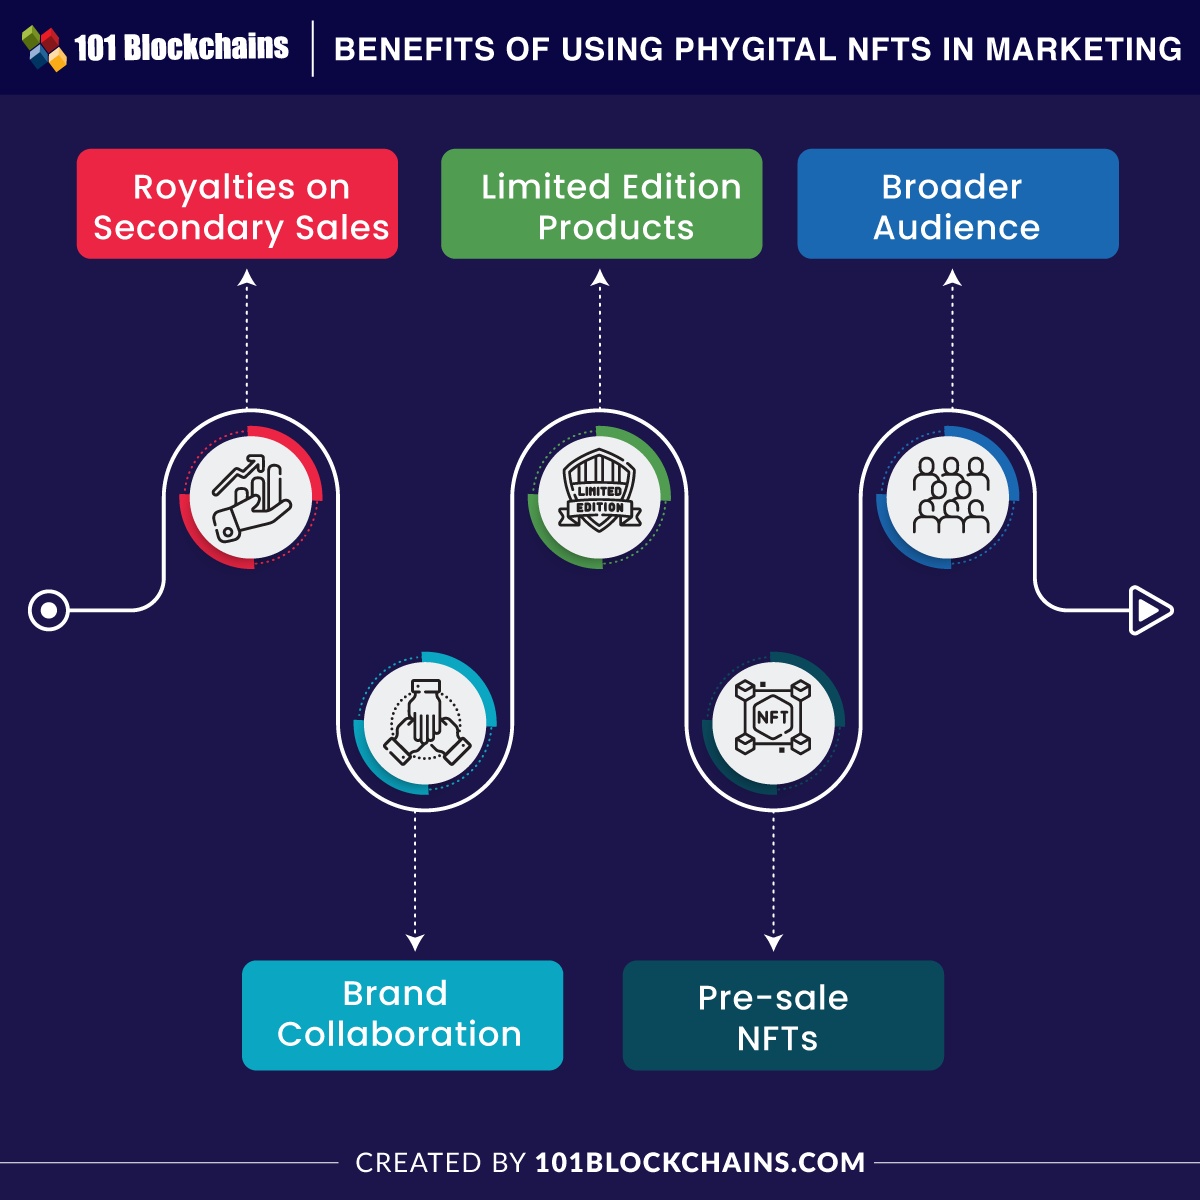 Benefits of Using Phygital NFTs in Marketing